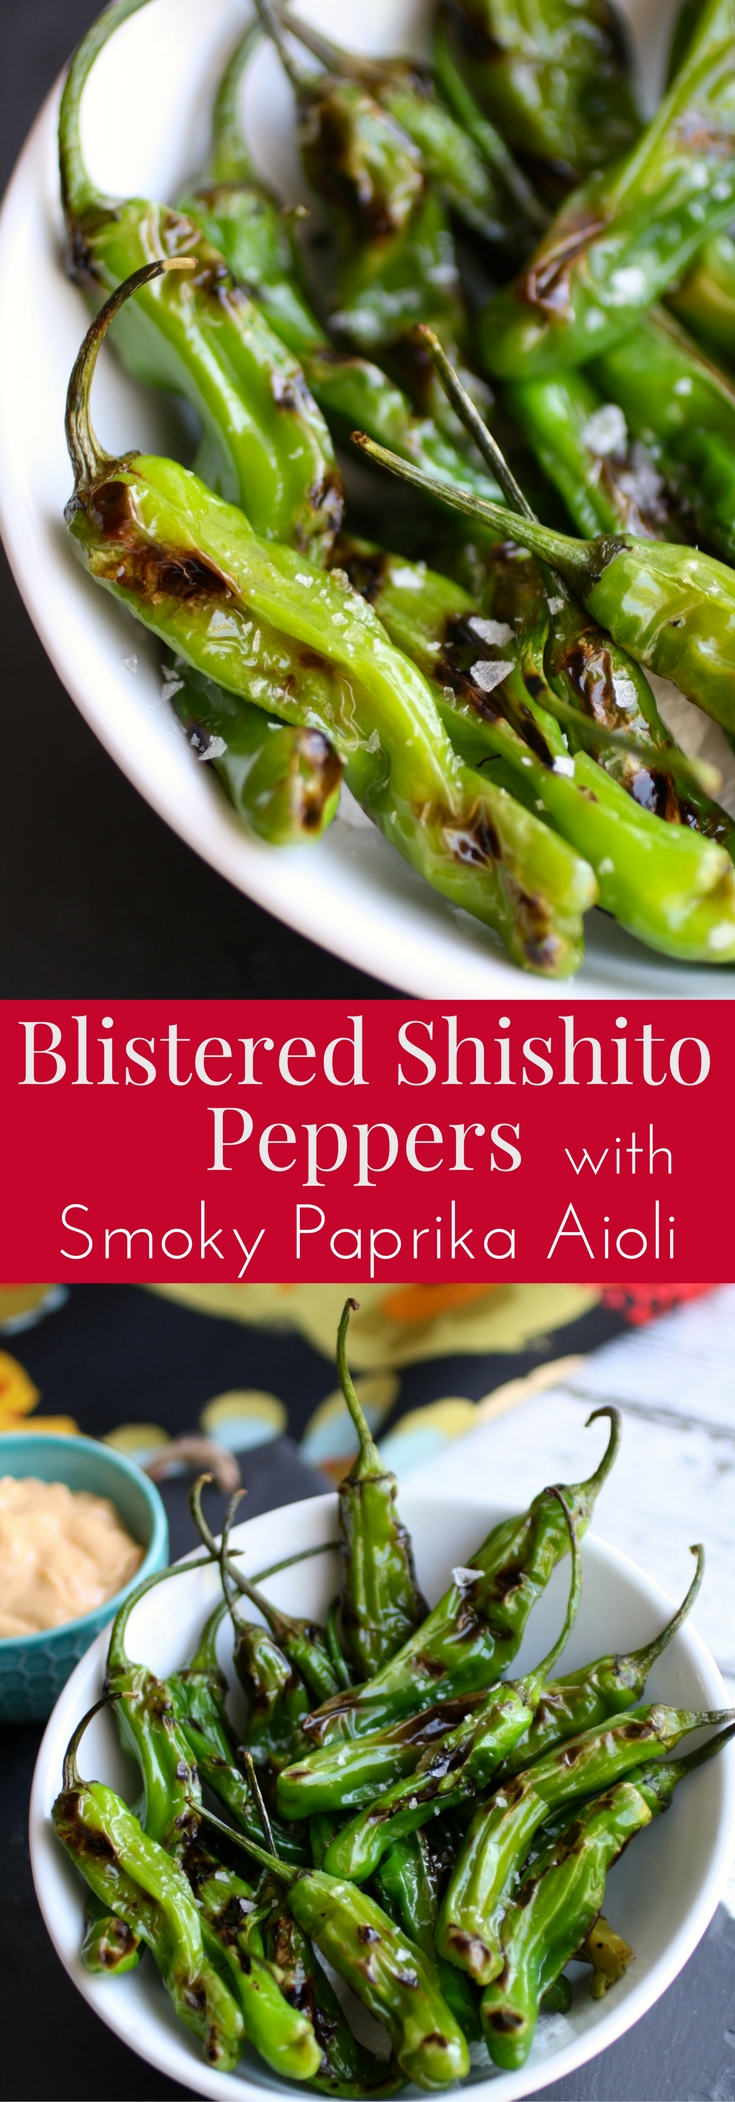 Shishito Peppers with Smoky Paprika Aioli is a fabulous appetizer. These peppers are a treat and make a great snack!